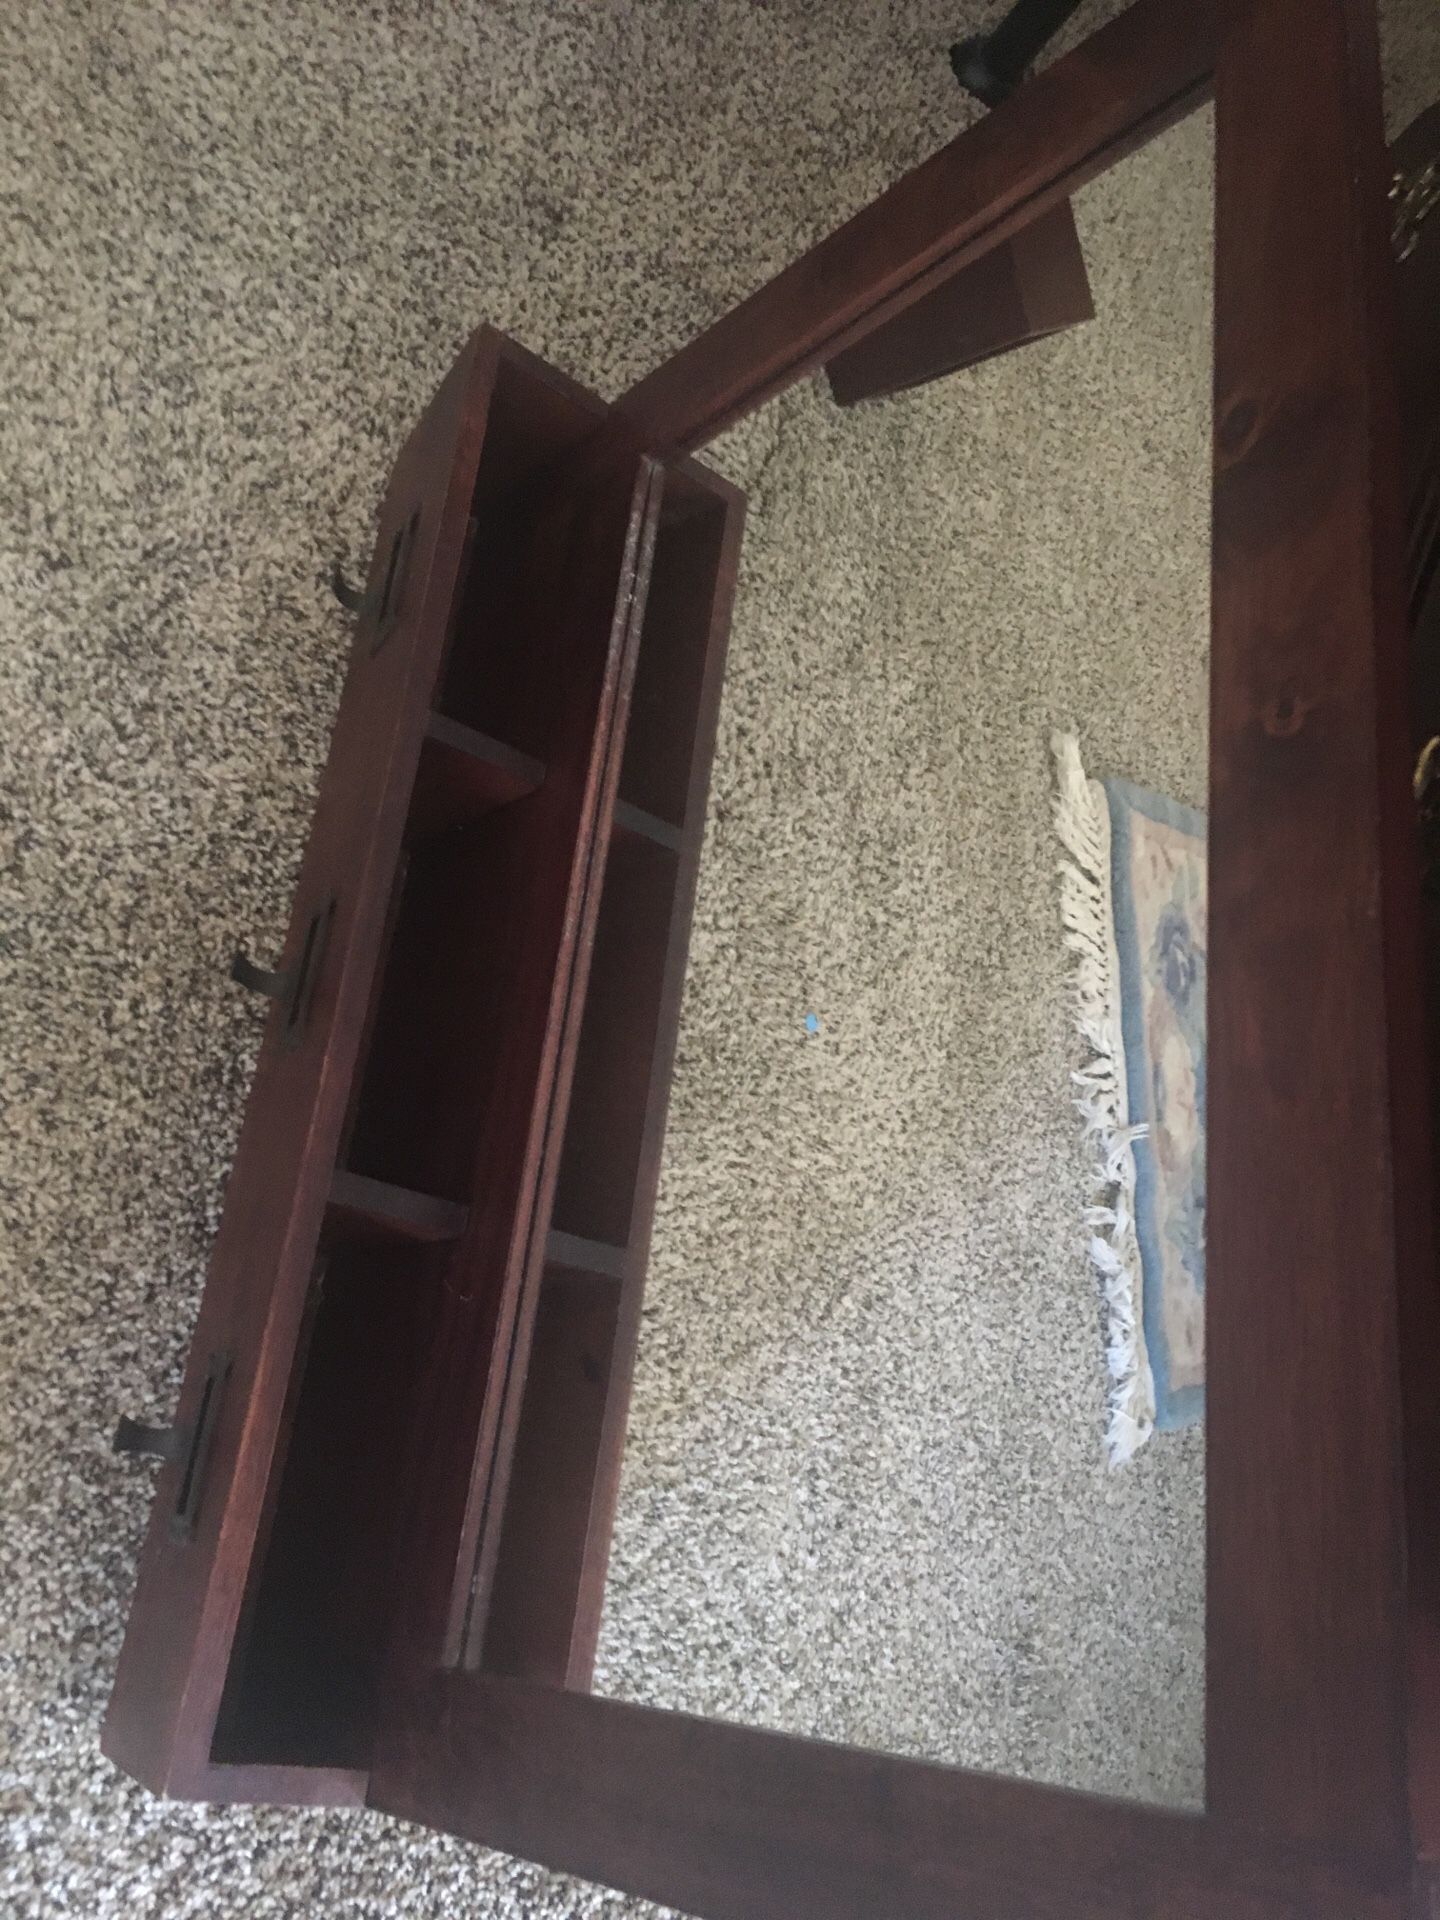 Mirror and shelf with hooks